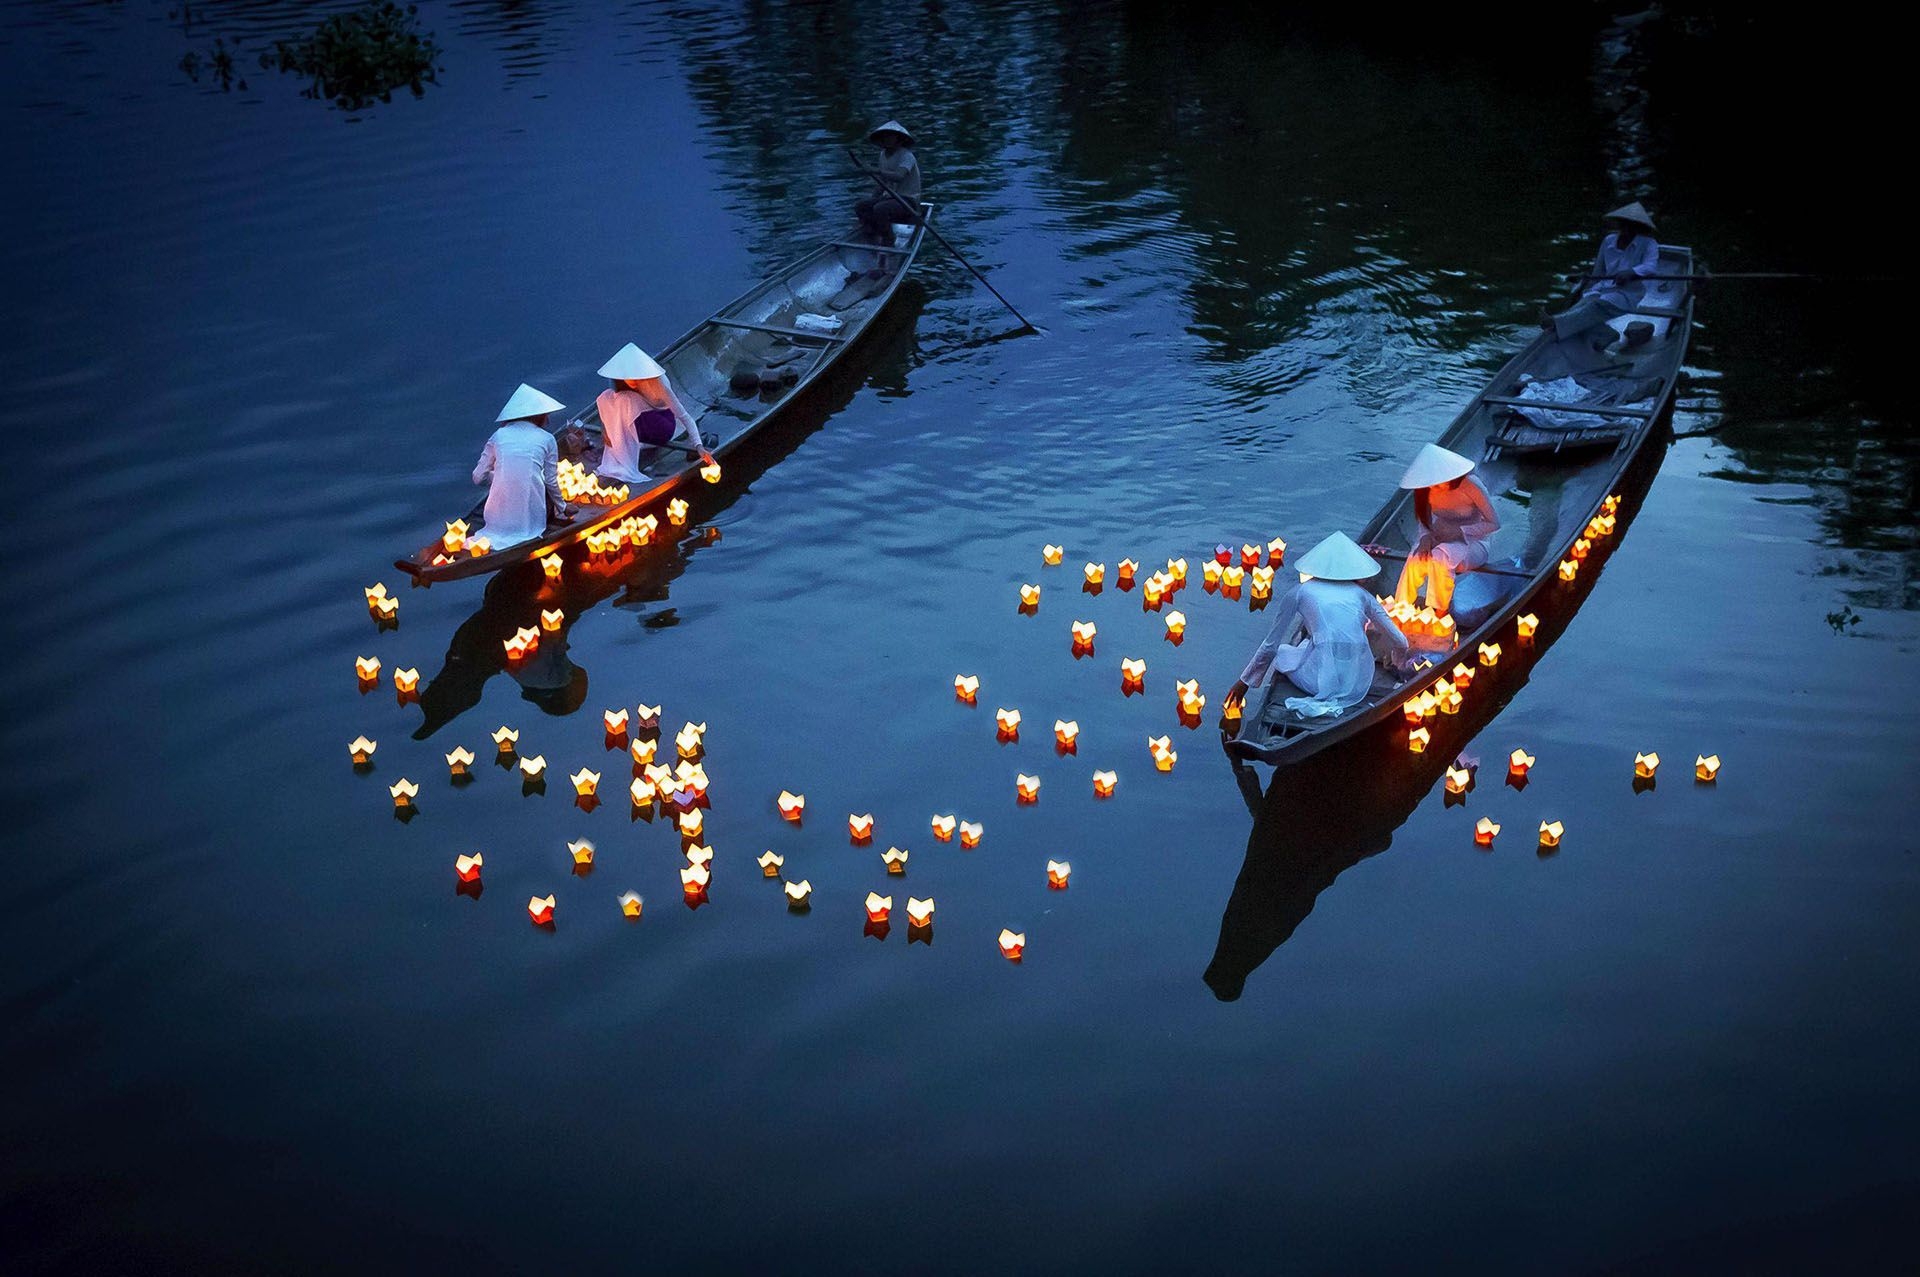 Photograph by Phạm Tỵ , National Geographic